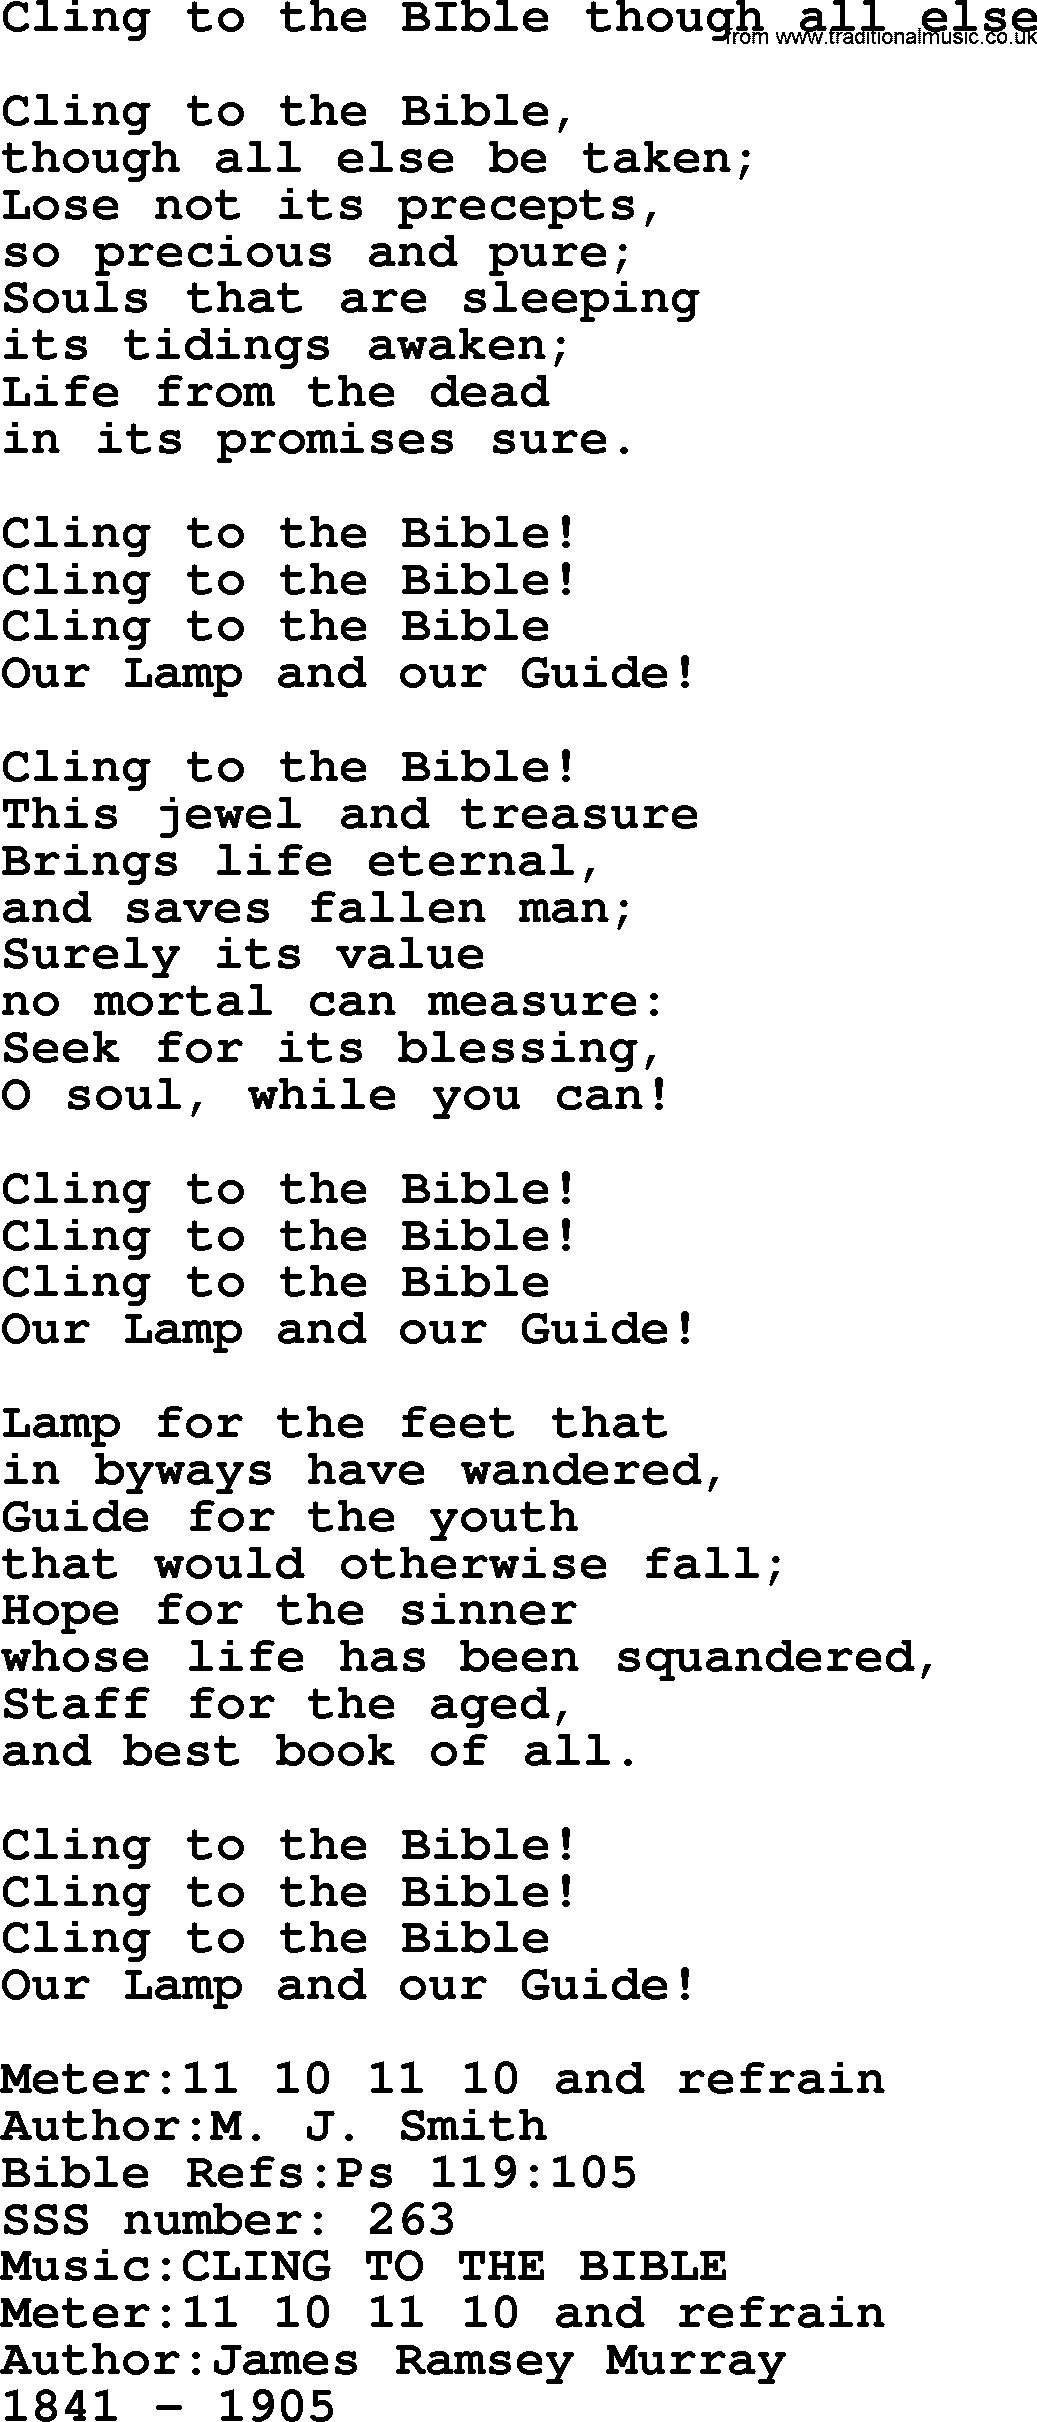 Sacred Songs and Solos complete, 1200 Hymns, title: Cling To The BIble Though All Else, lyrics and PDF